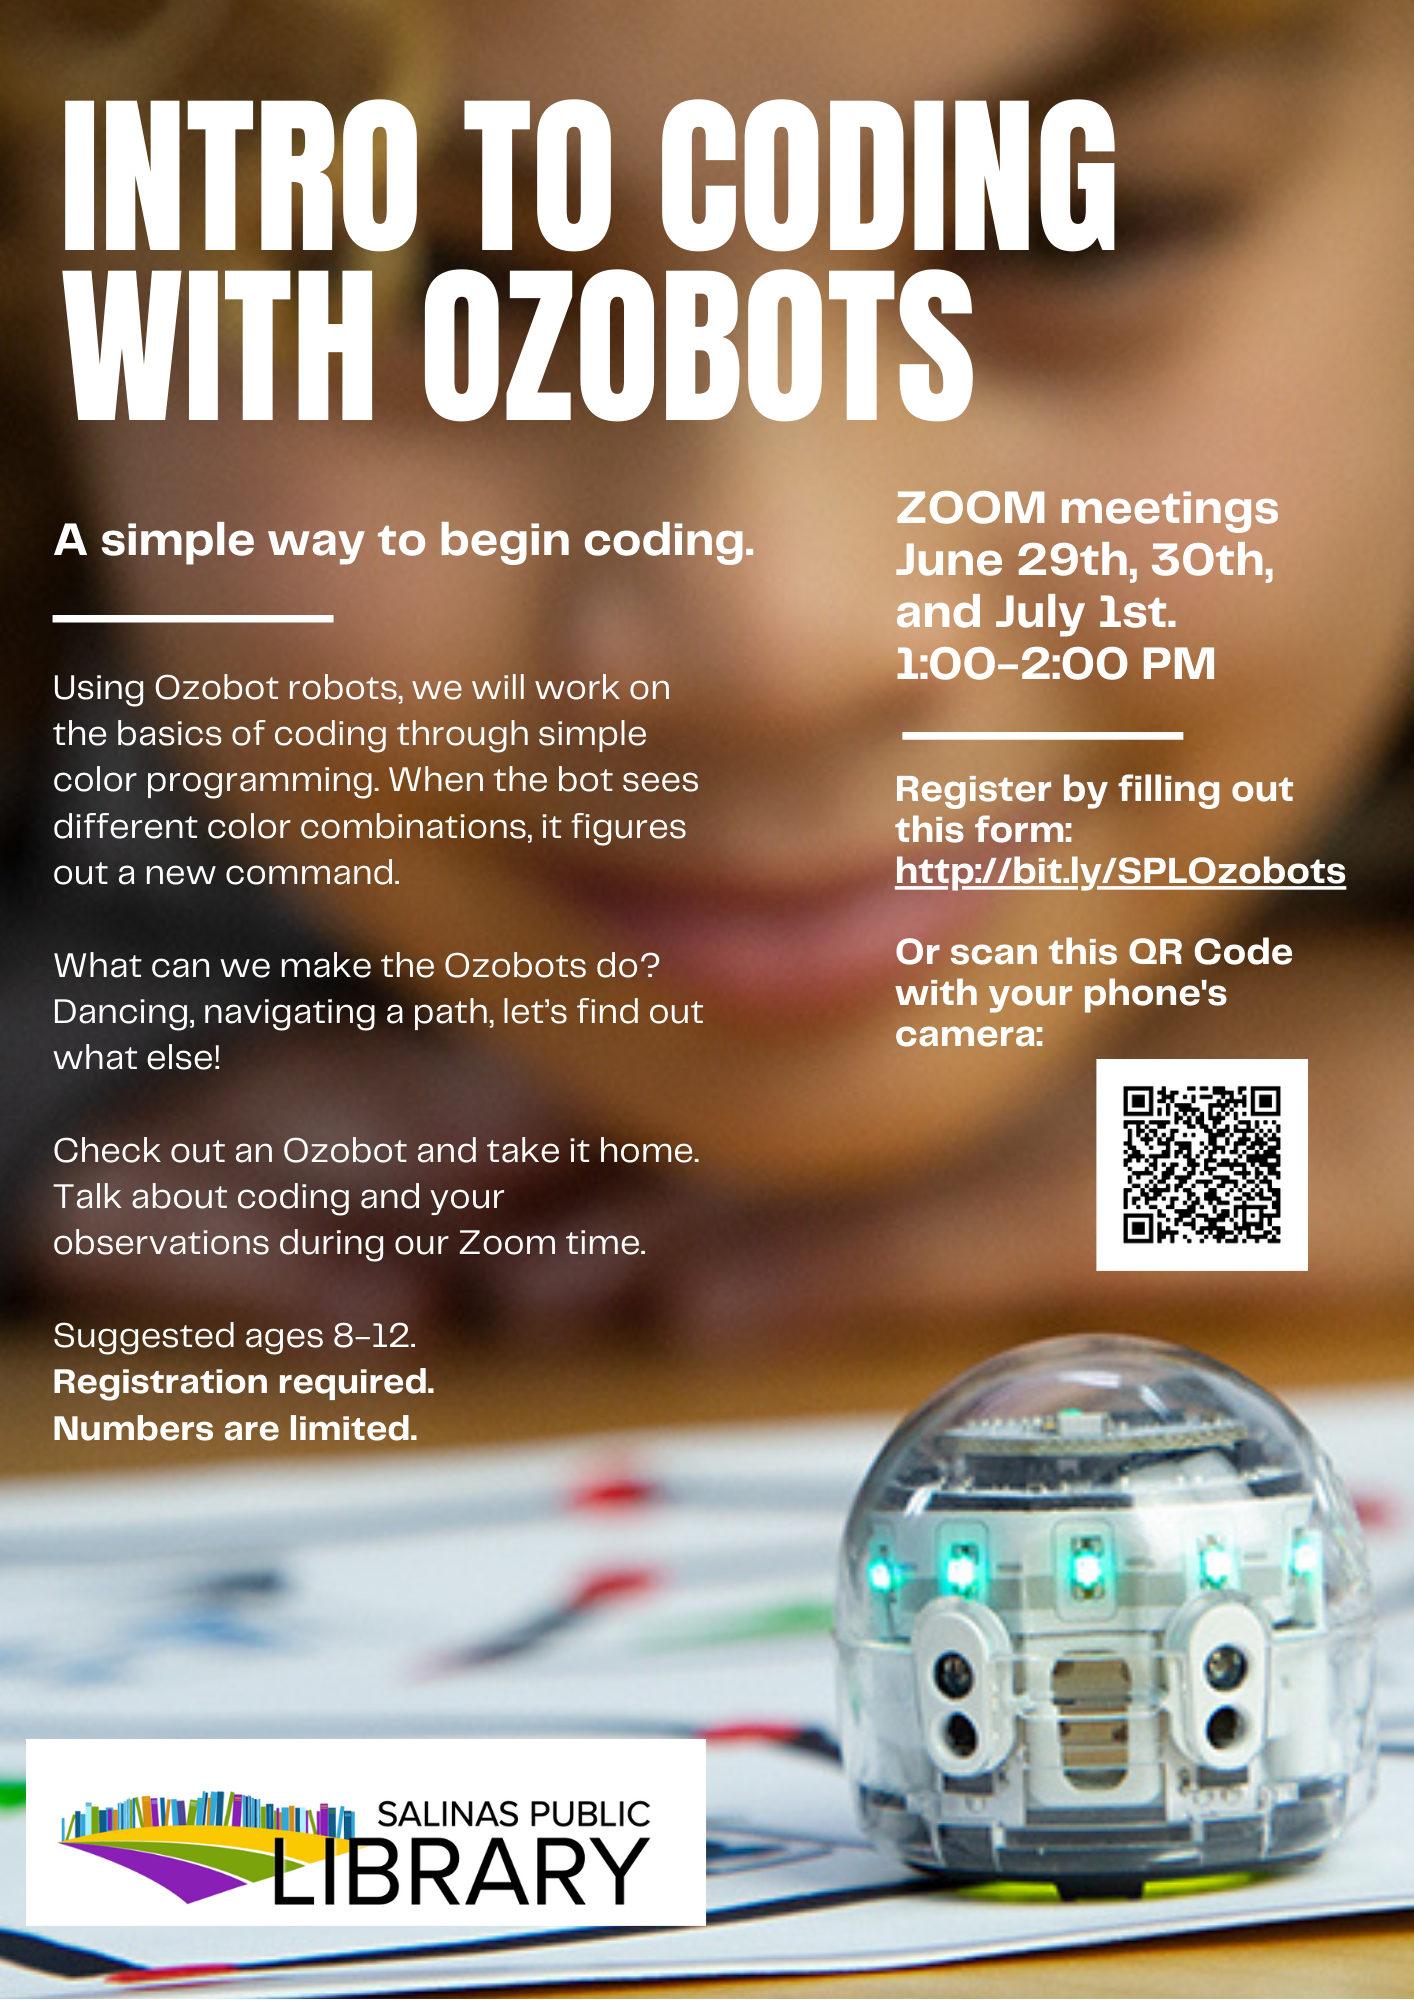 https://salinaspubliclibrary.org/sites/default/files/media_browser/intro_to_coding_with_ozobots.png